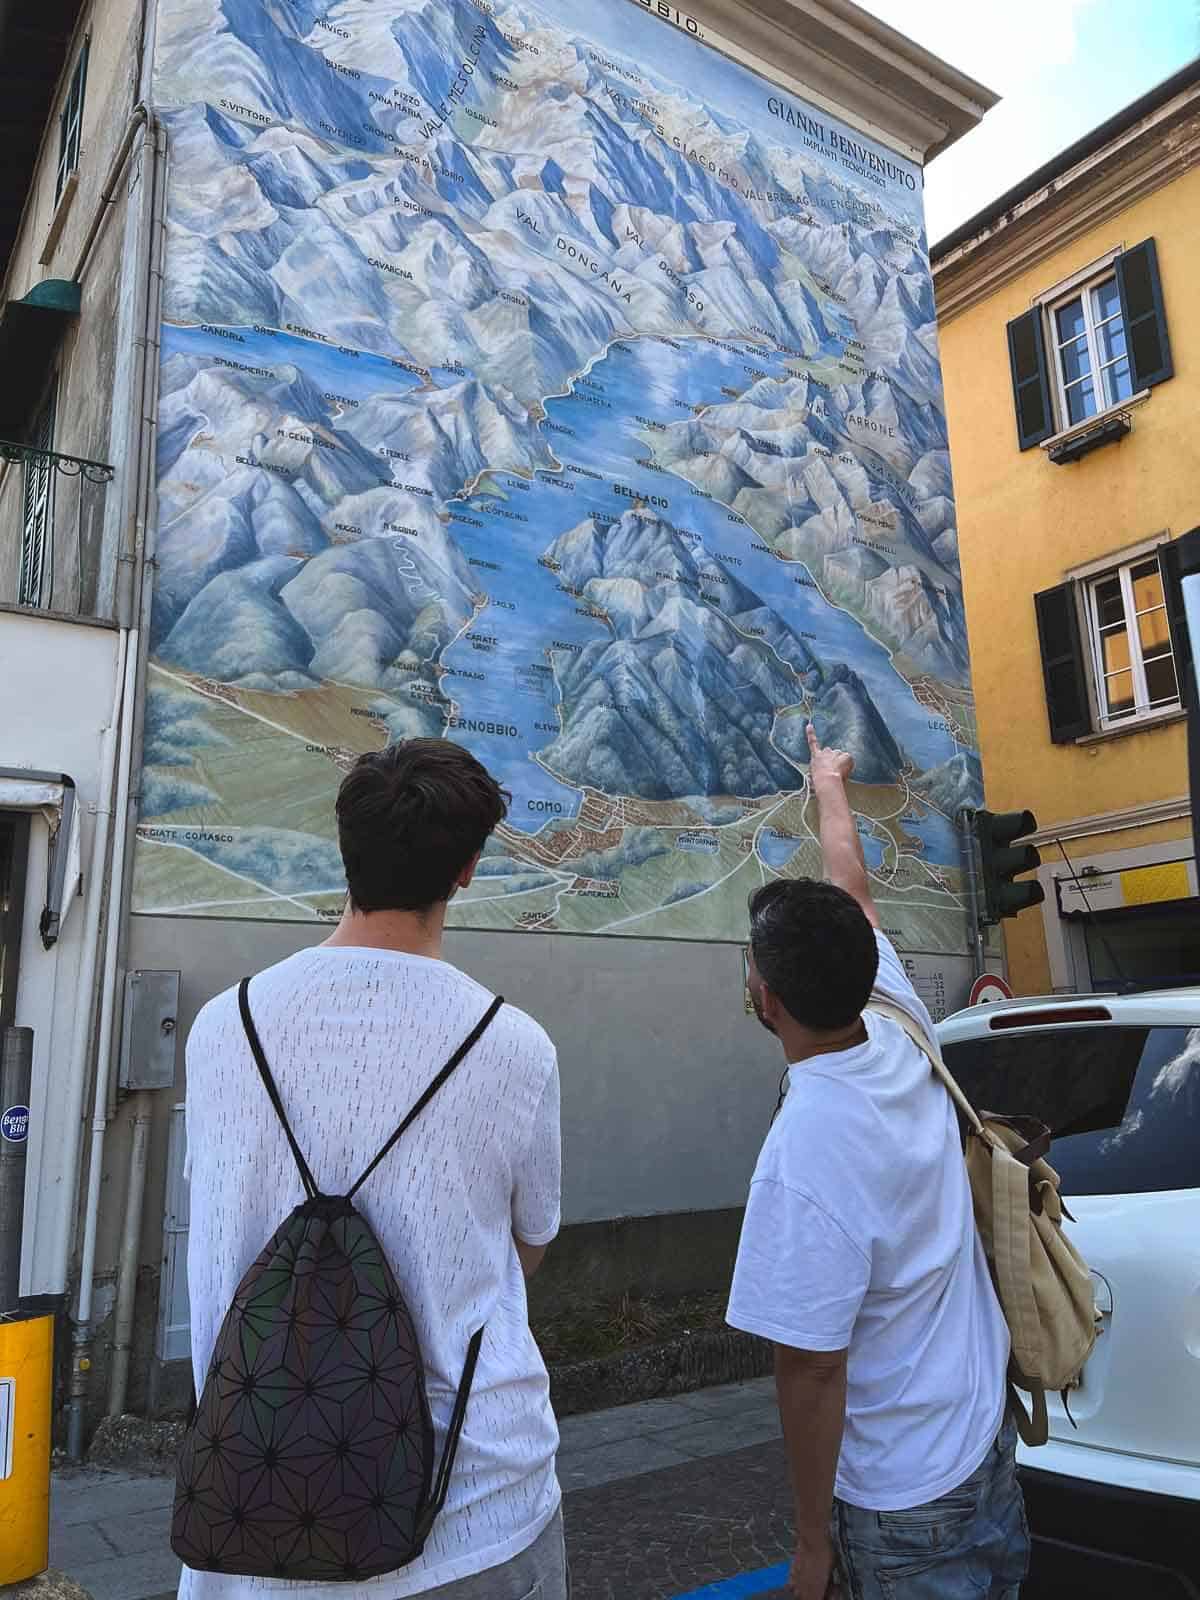 two men deciding where to go watching a painted map on a wall in Cernobbio.